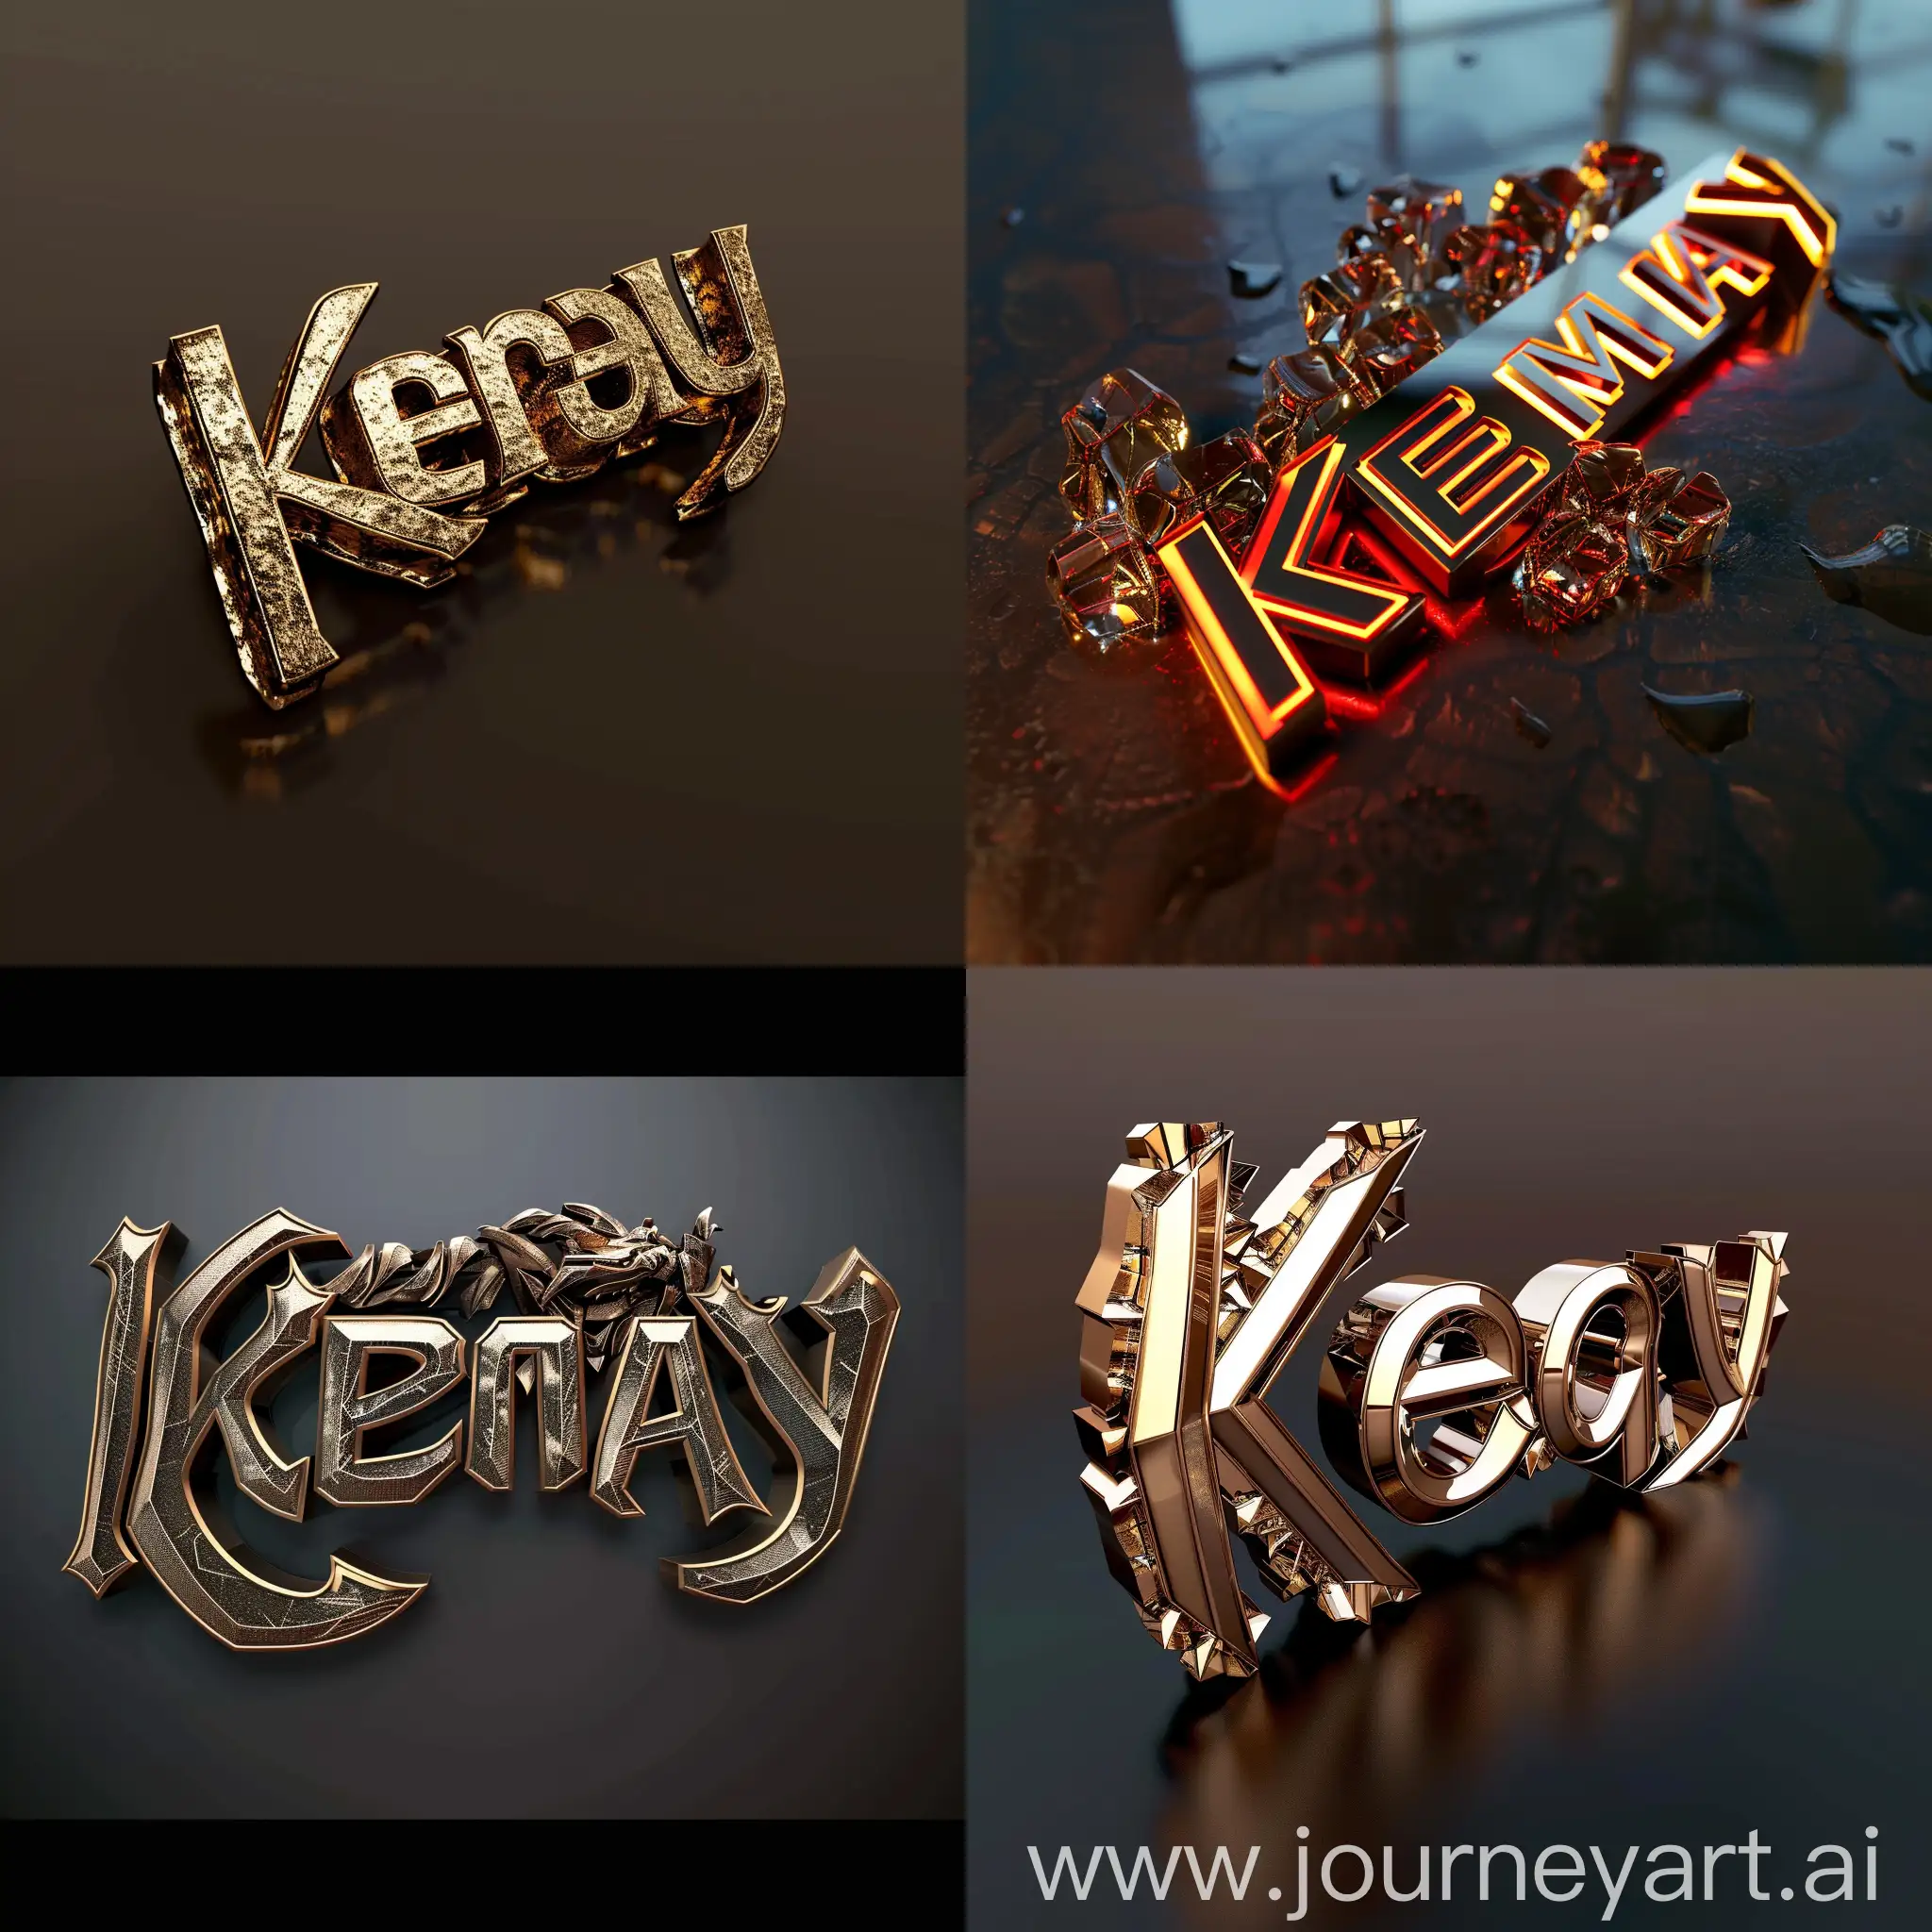 promp: Create an ultra-realistic 3D logo with the name "Kemay"